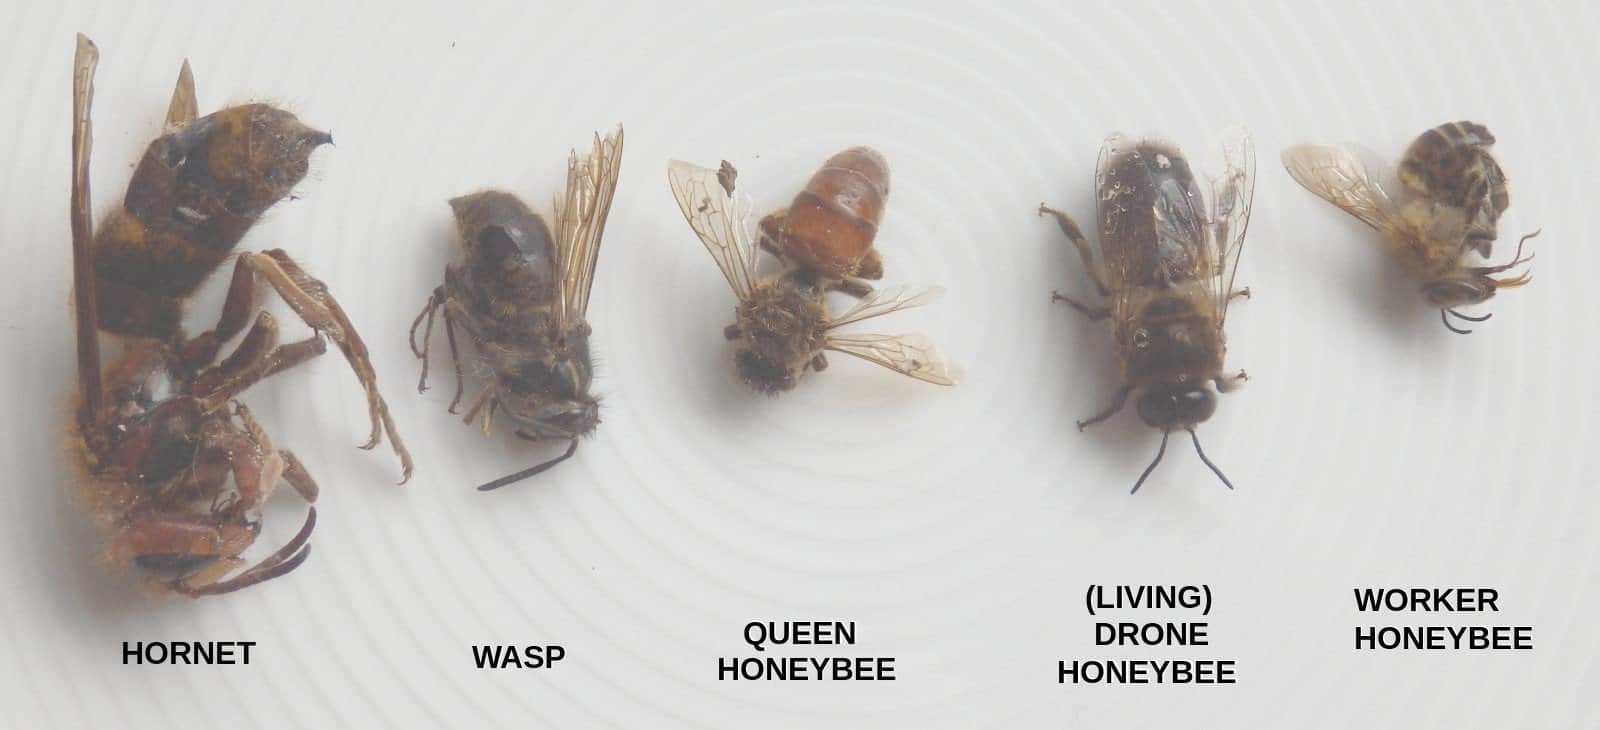 How Does A Queen Bee Mate?